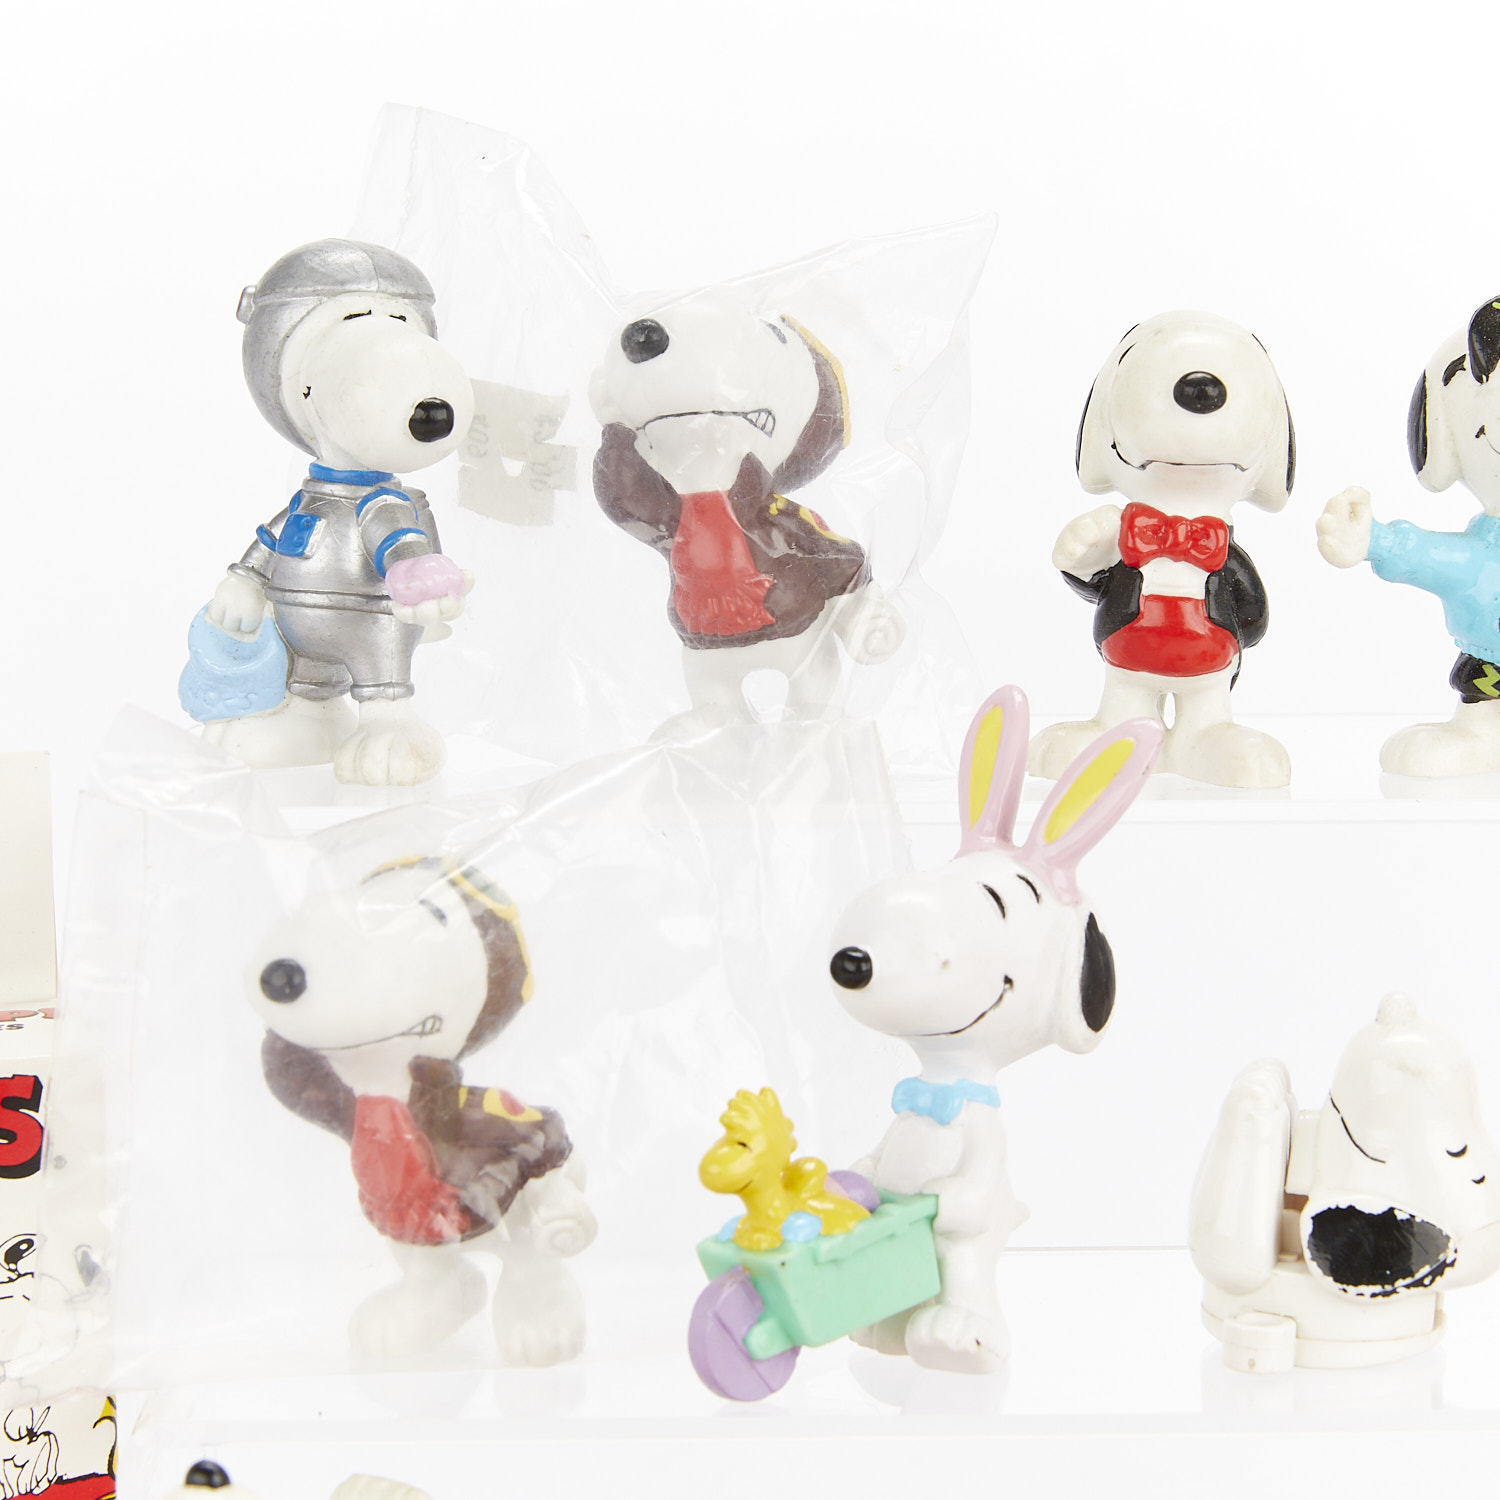 Group of 16 Snoopy Figurines and Bandages - Image 5 of 12